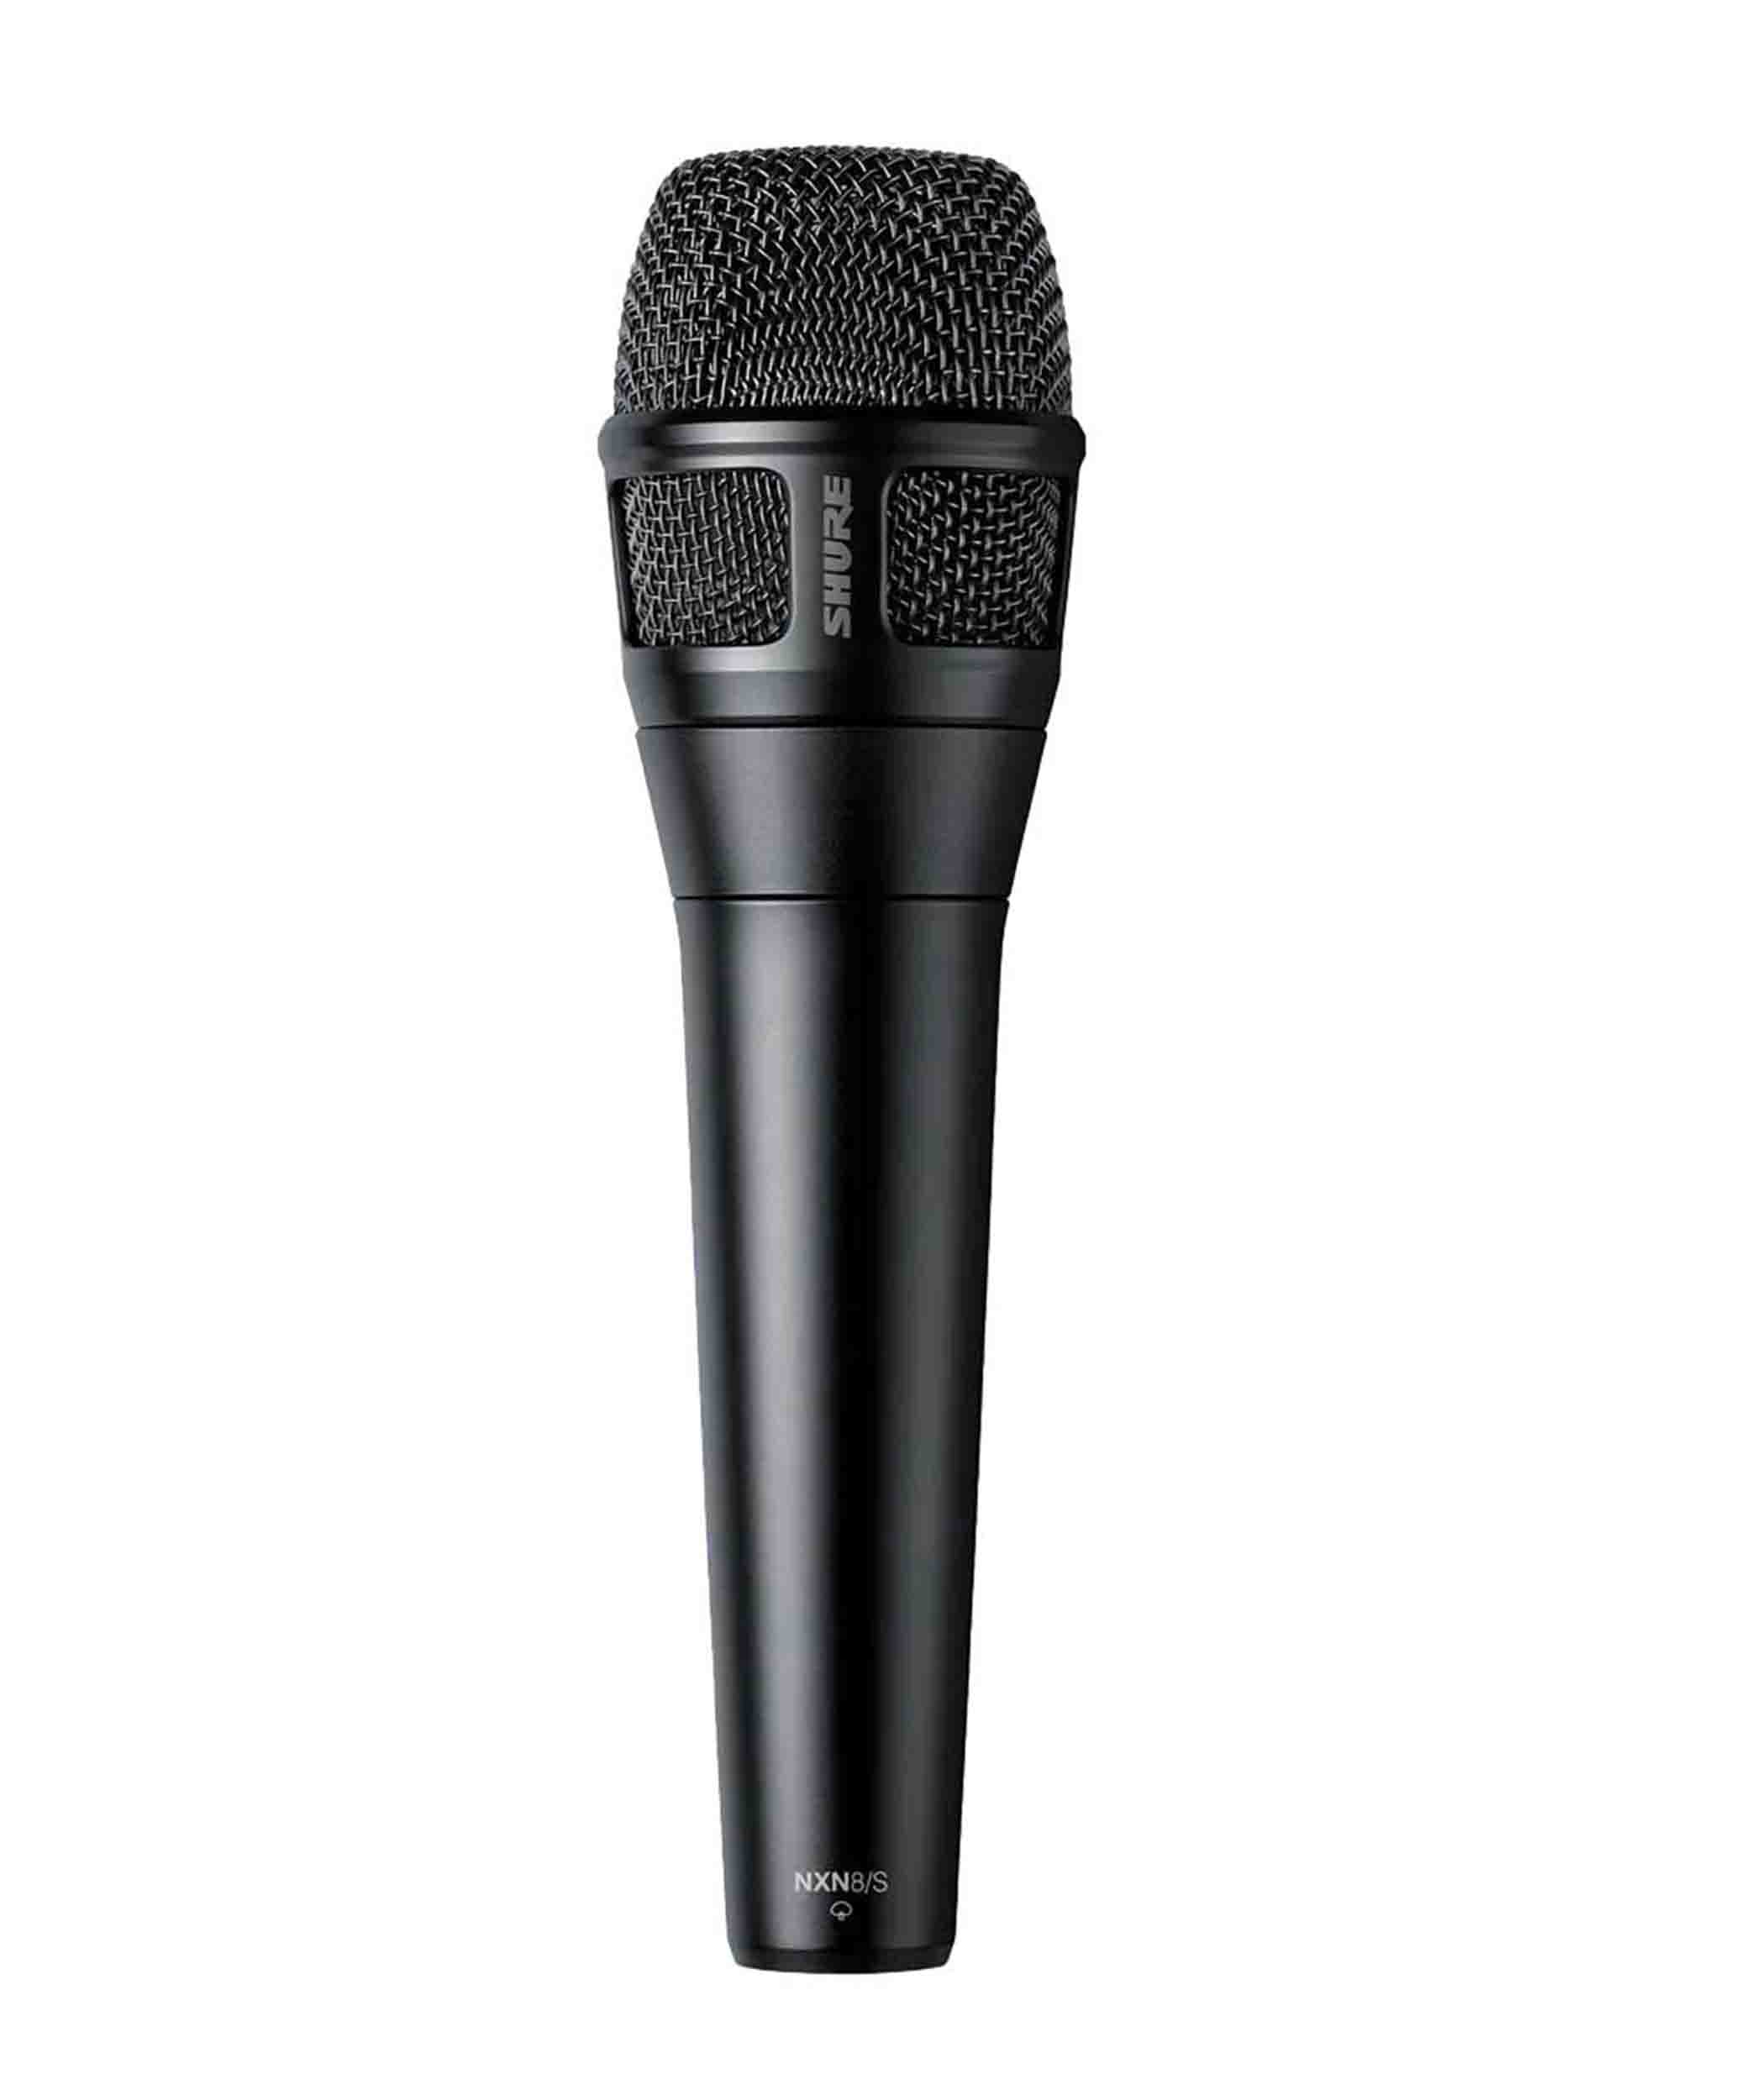 Shure Nexadyne 8/S Supercardioid Dynamic Vocal Microphone with Revonic Transducer - Black by Shure